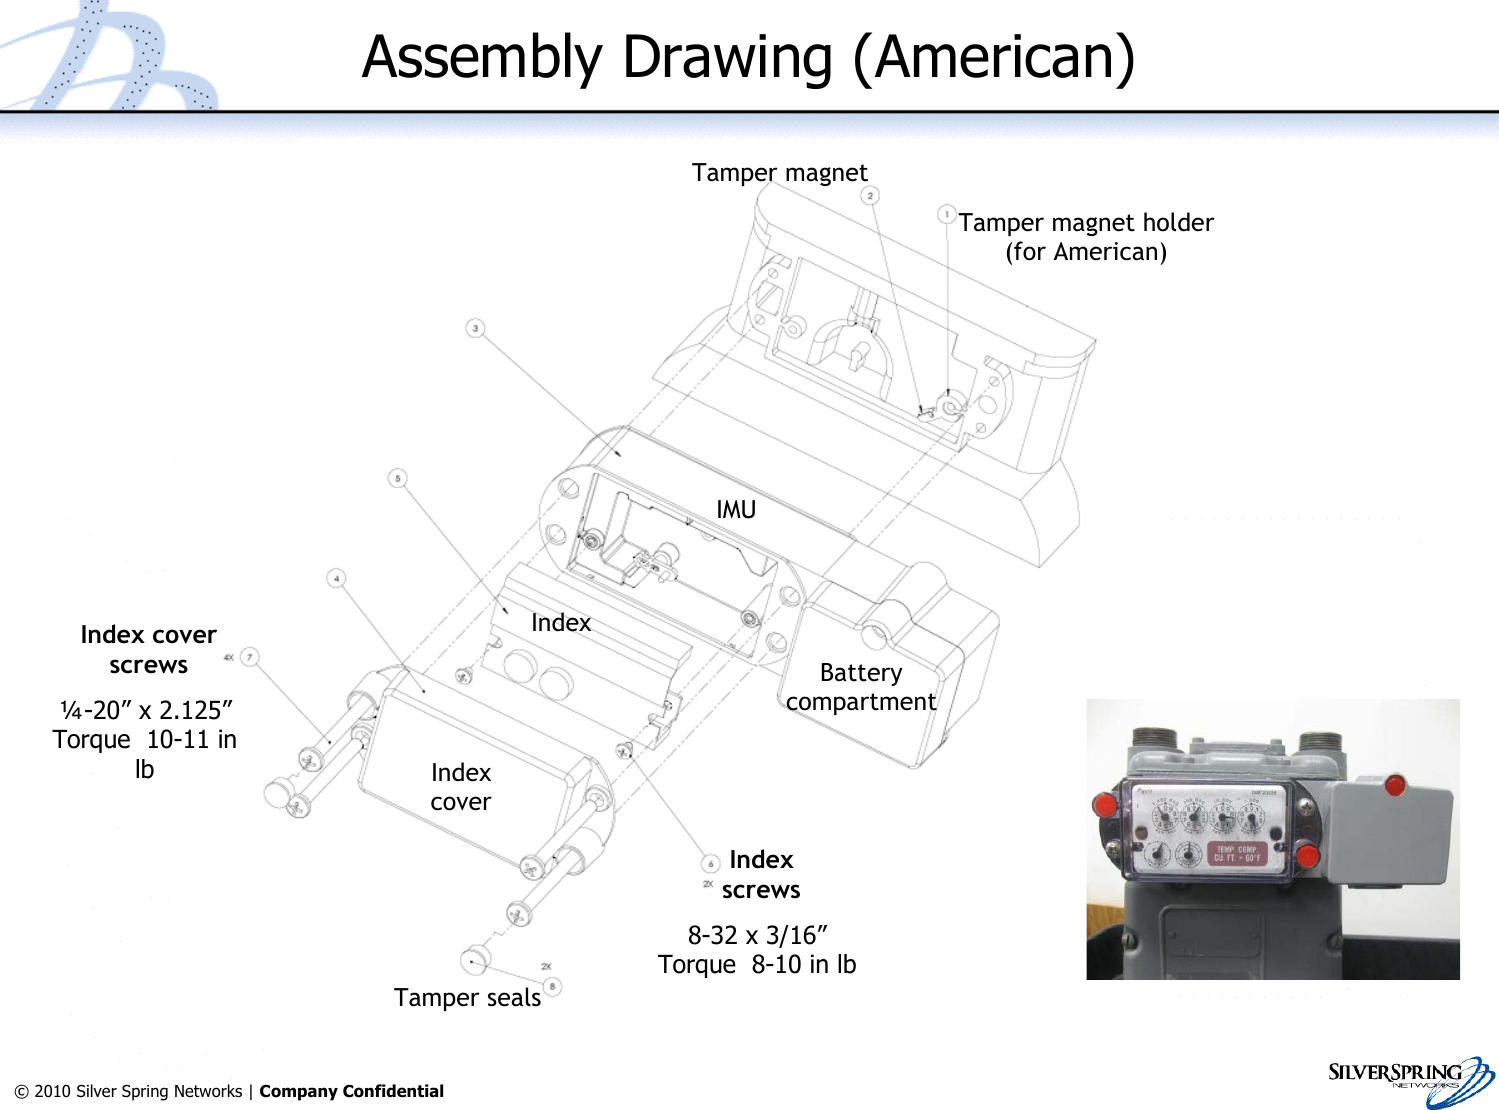 7© 2010 Silver Spring Networks | Company Confidential Assembly Drawing (American)IndexcoverIndexscrewsIndex coverscrewsTamper sealsTamper magnet holder(for American)Tamper magnetIMUIndexBatterycompartment!-20” x 2.125”Torque  10-11 inlb8-32 x 3/16”Torque  8-10 in lb